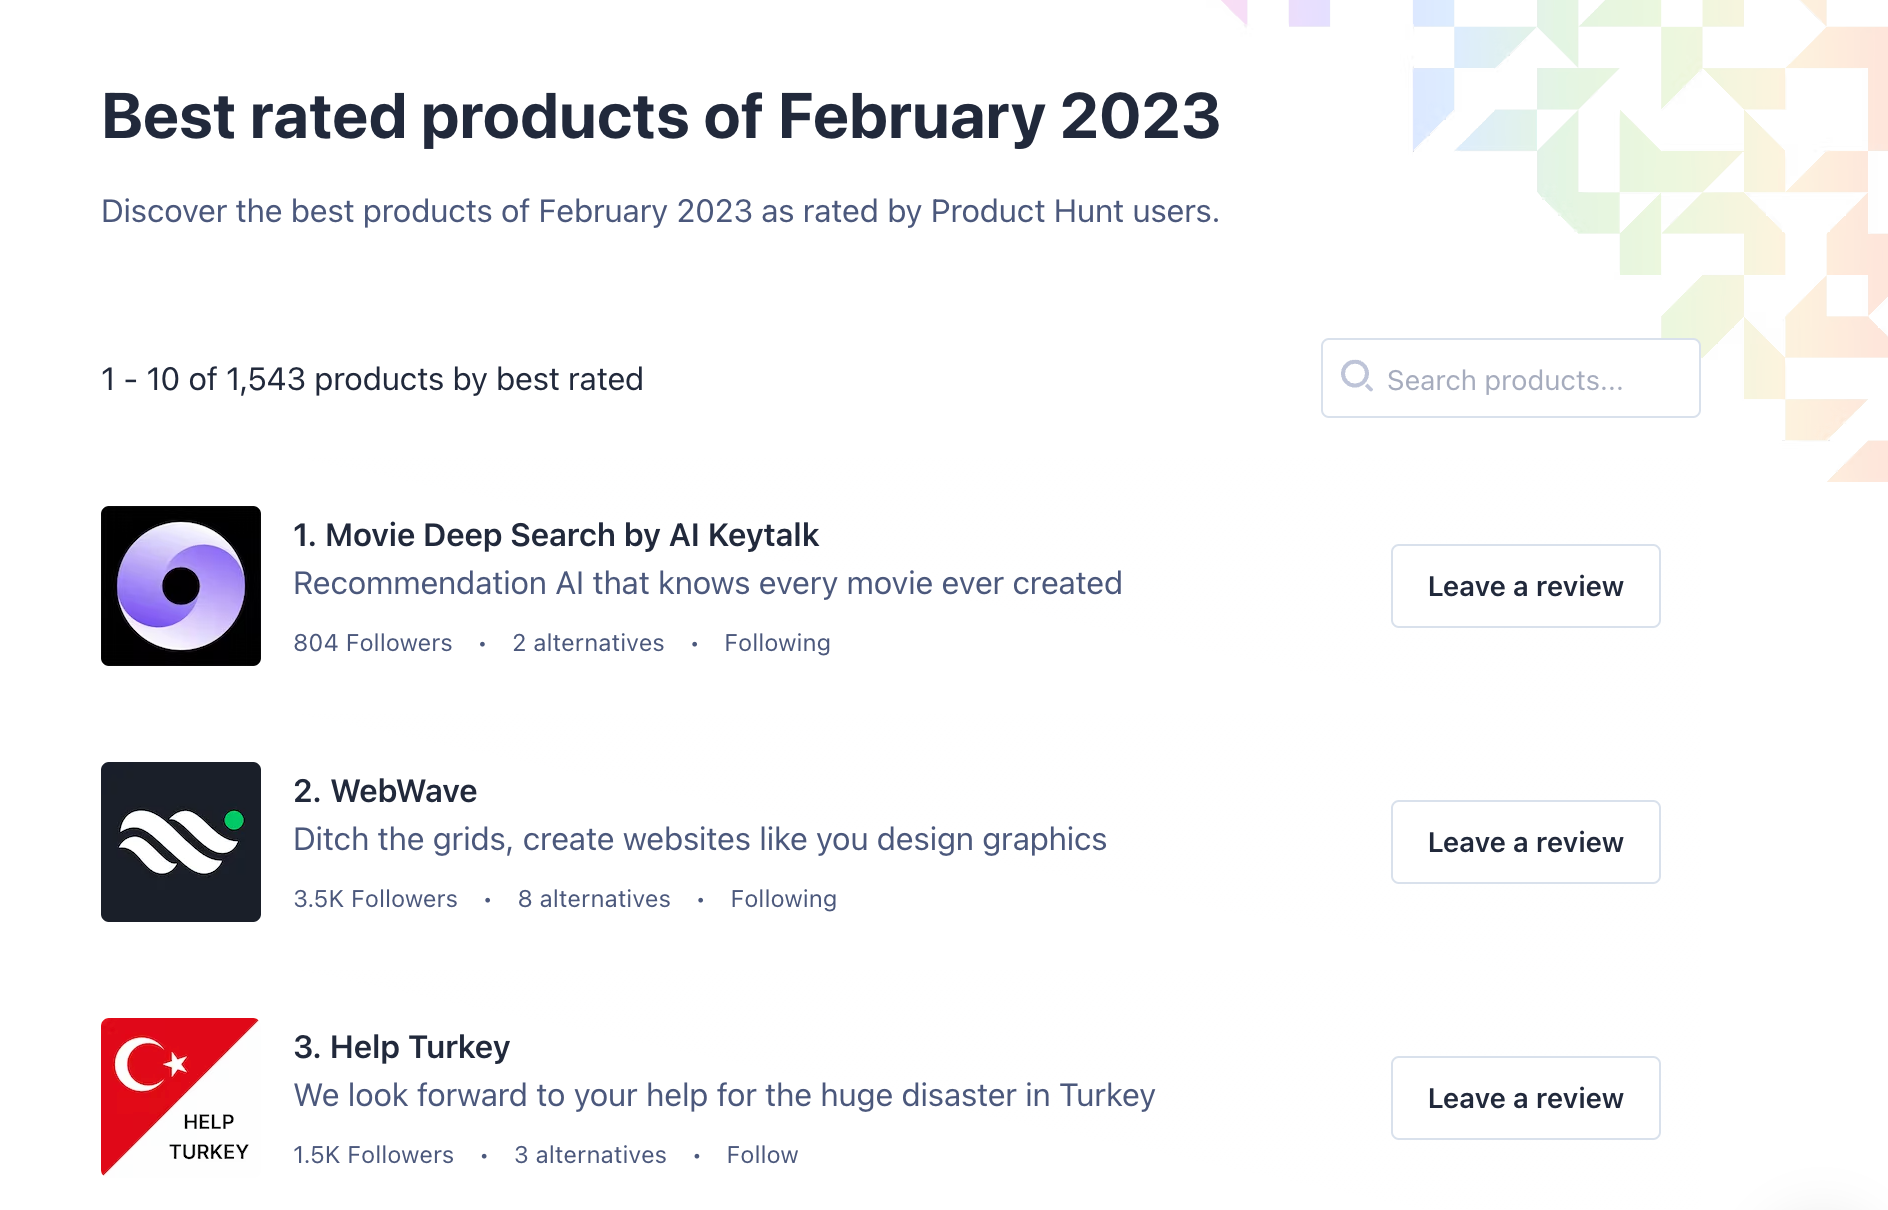 Movie Deep Search was named #1 best-rated product in February 2023 on Product Hunt